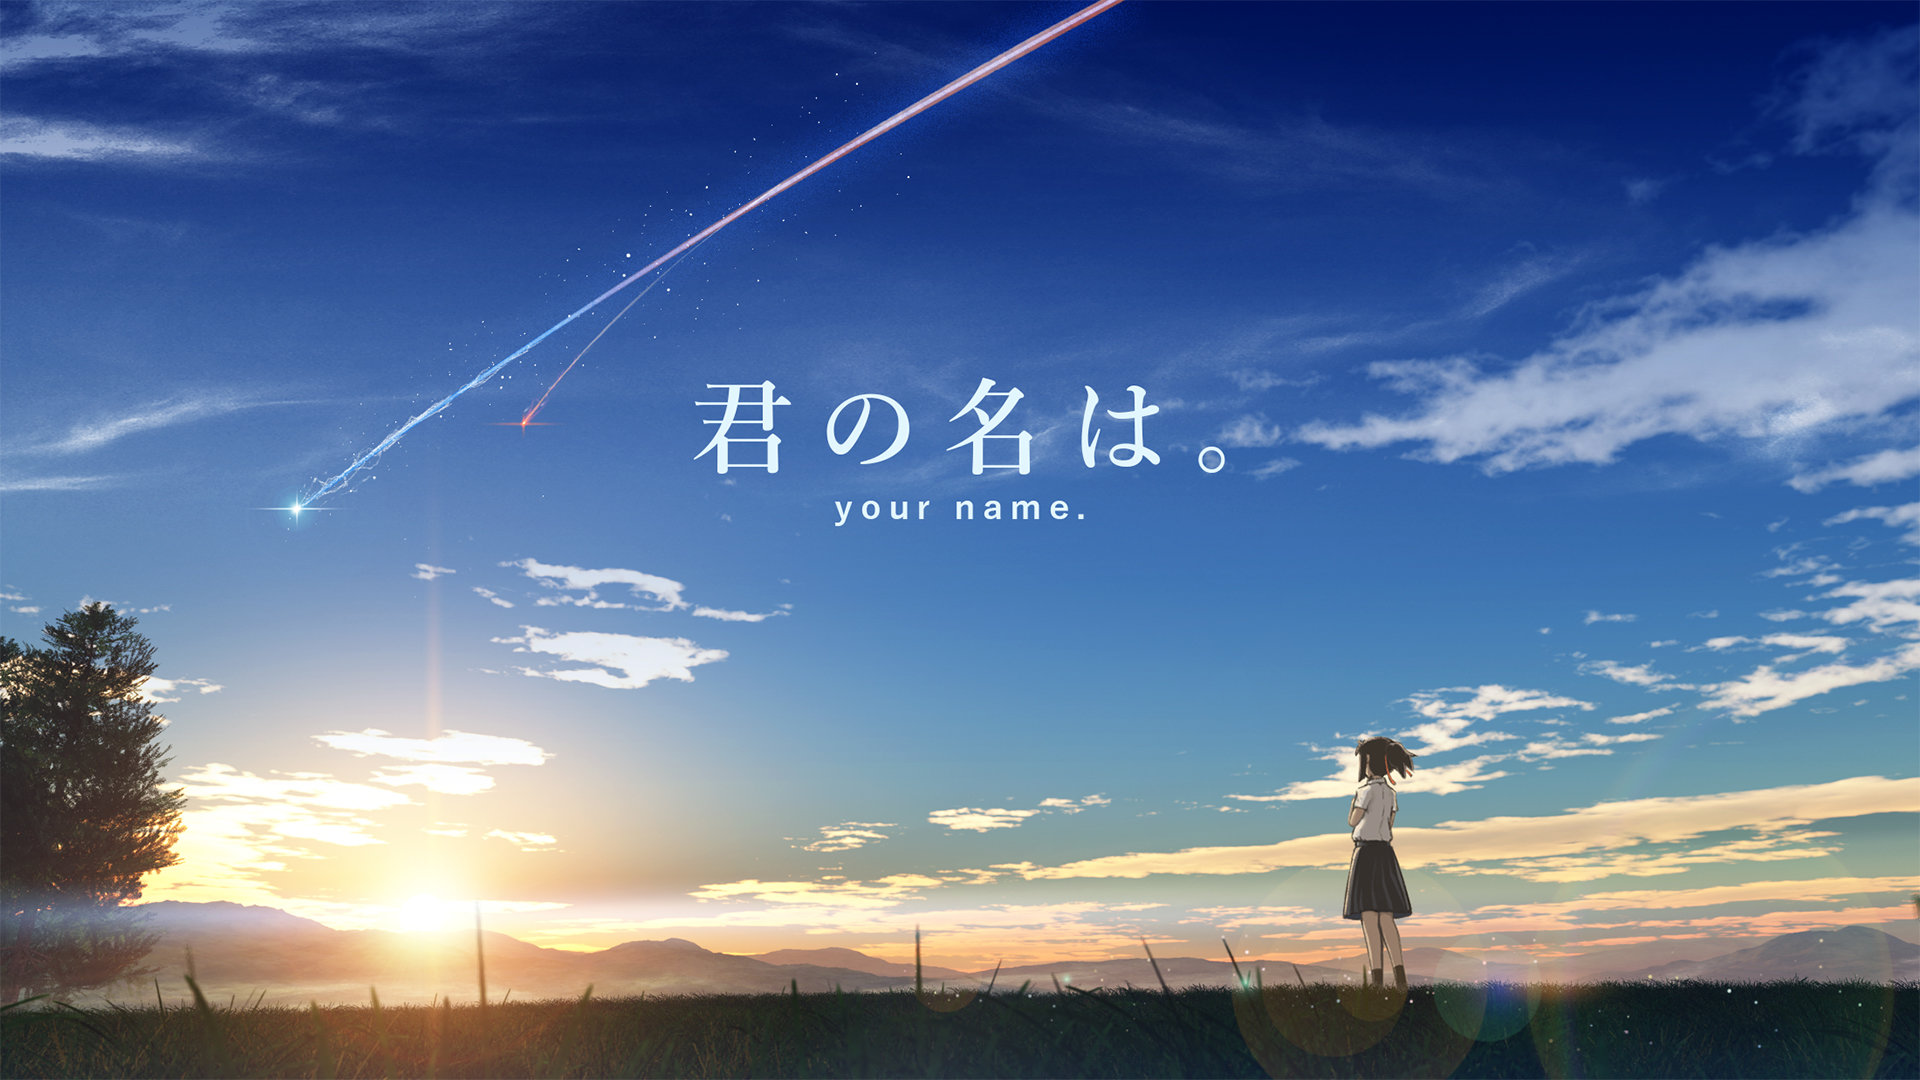 Free Download Your Name Background Id - Kimi No Nawa Ost - HD Wallpaper 